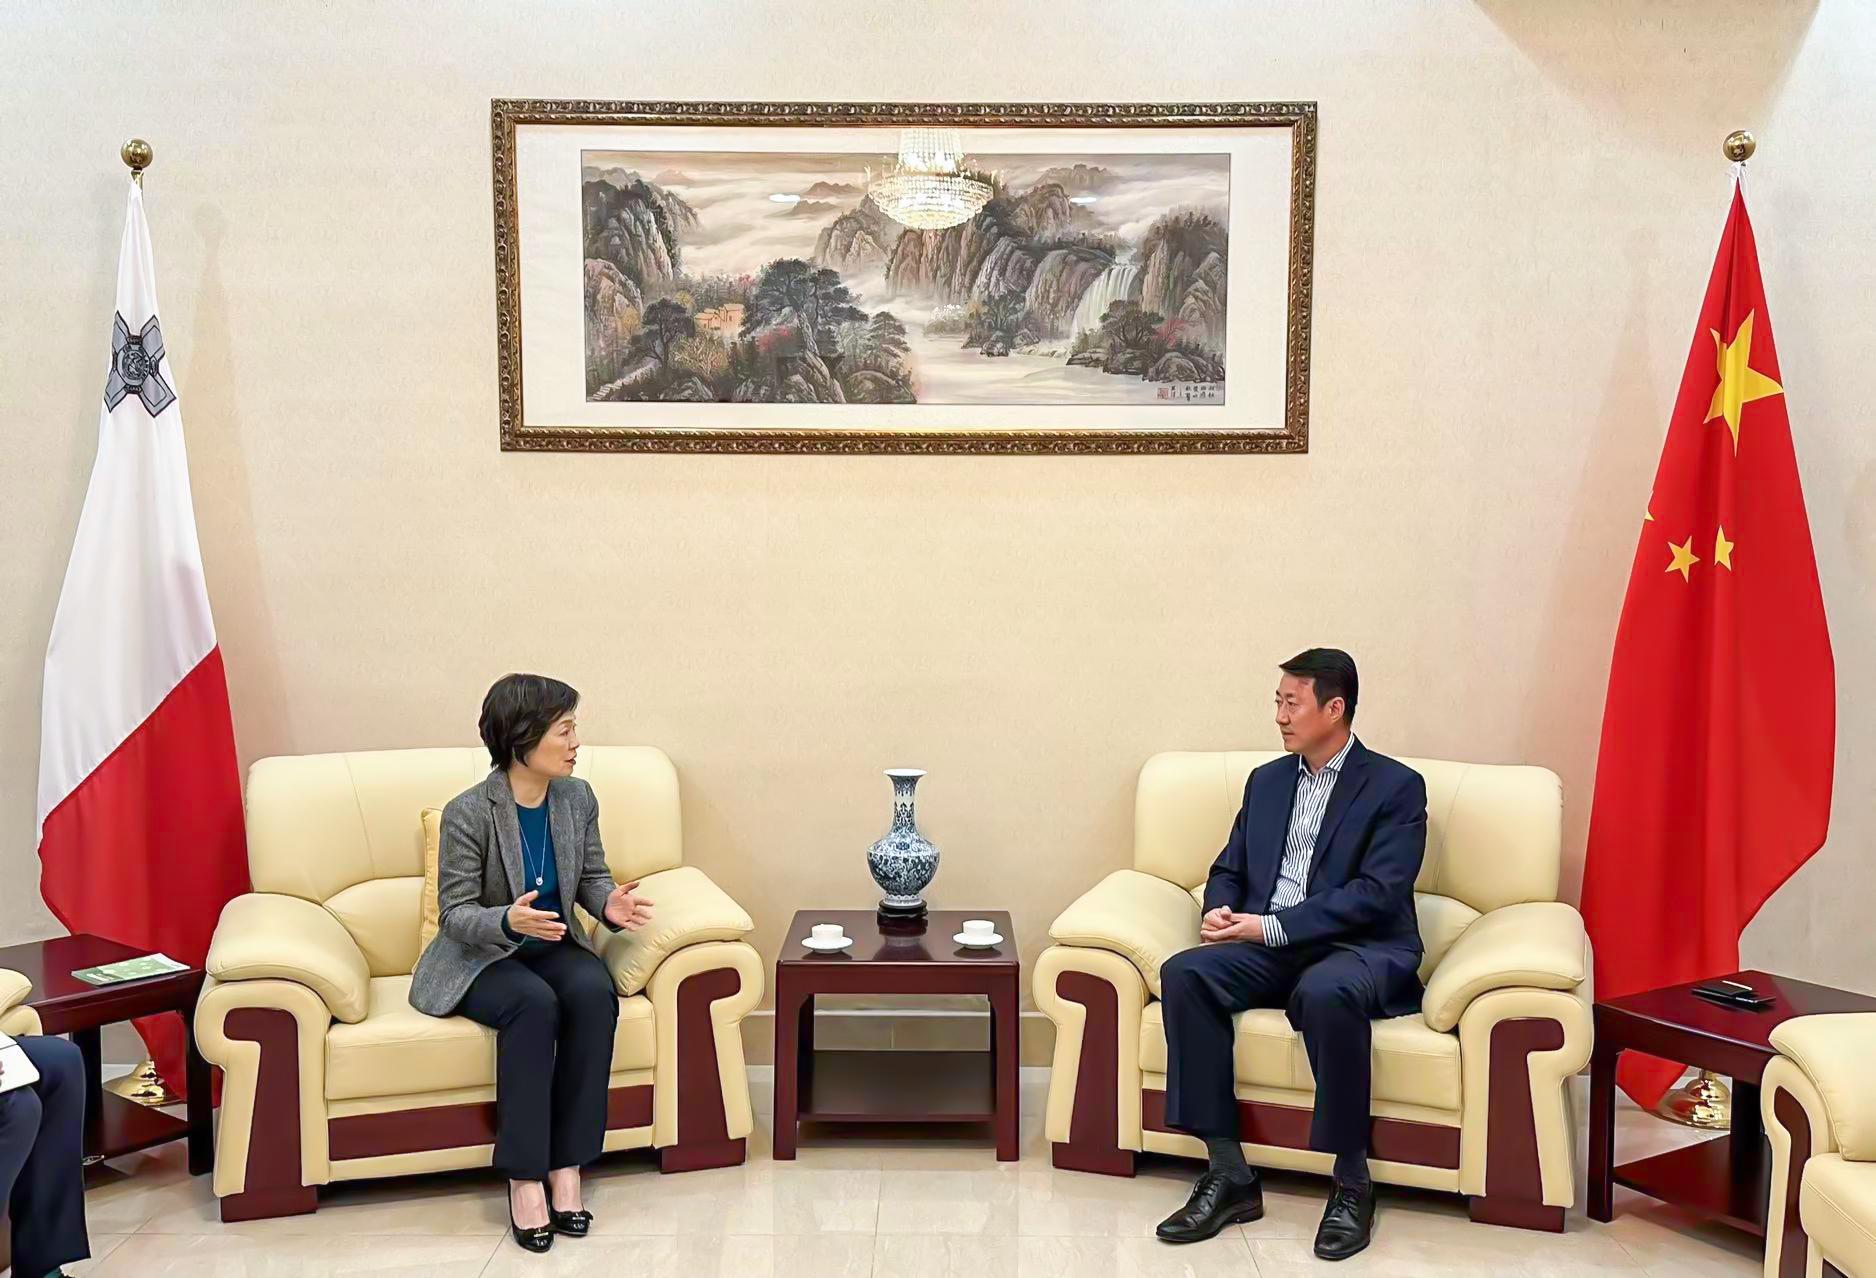 The Secretary for Education, Dr Choi Yuk-lin (left), pays a courtesy call on the Ambassador of the People's Republic of China to the Republic of Malta, Mr Yu Dunhai (right), in Malta on April 17 (Malta time).